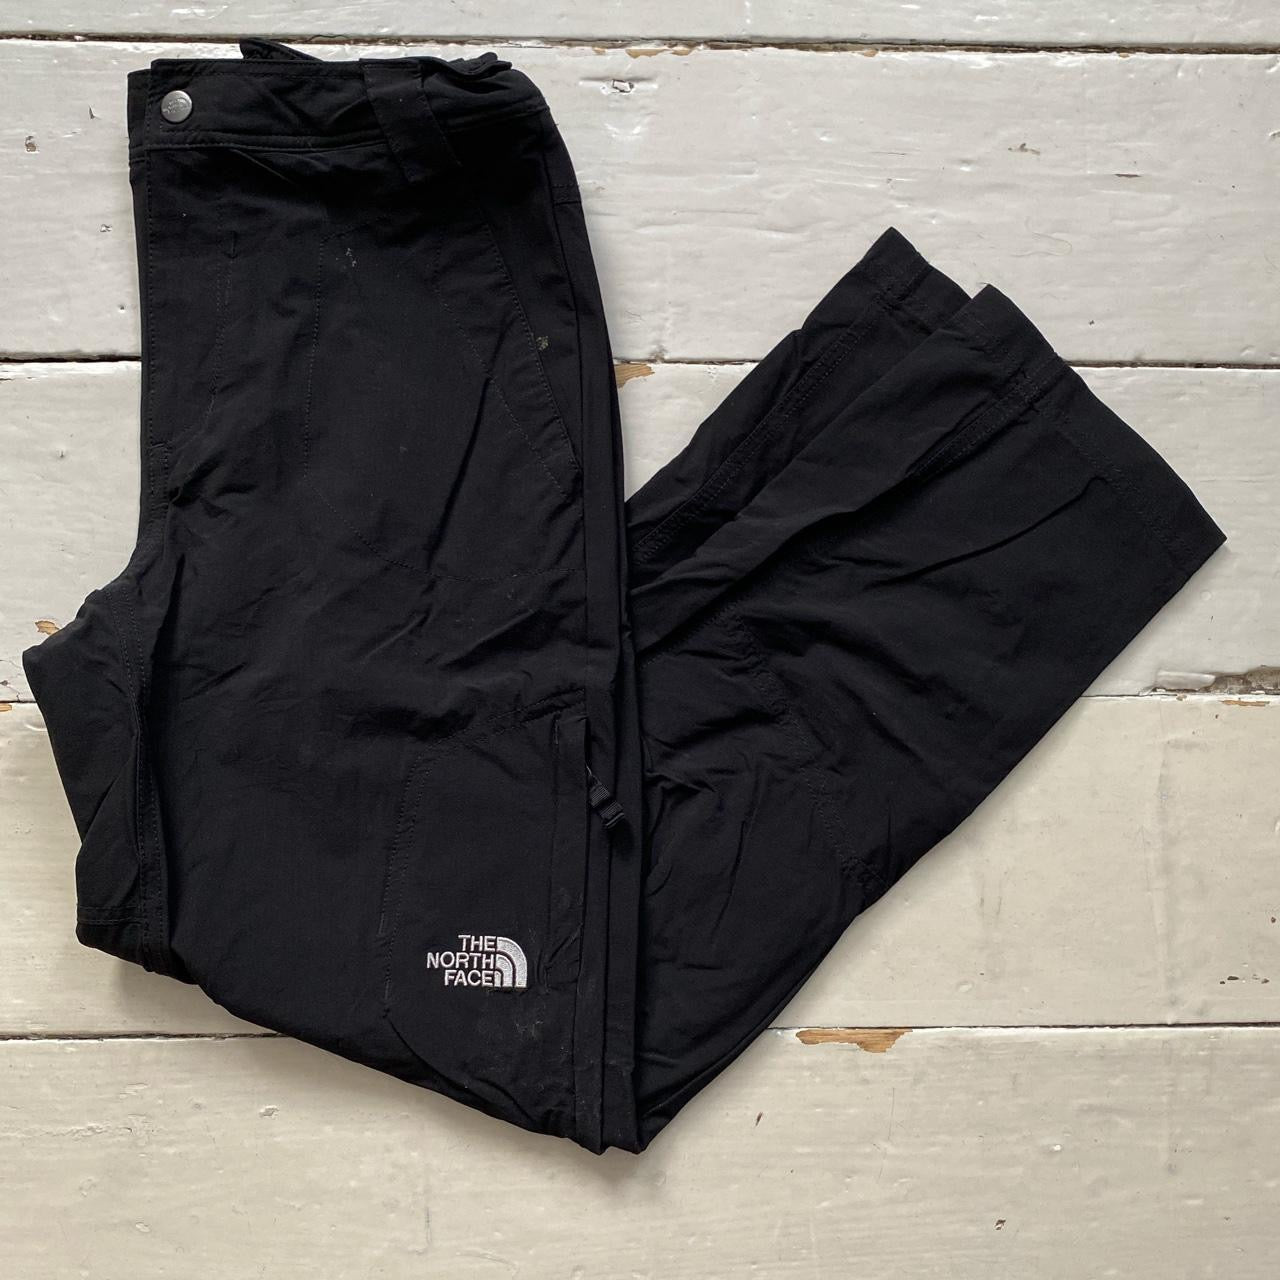 The North Face Black Shell Bottoms (Womens Small)